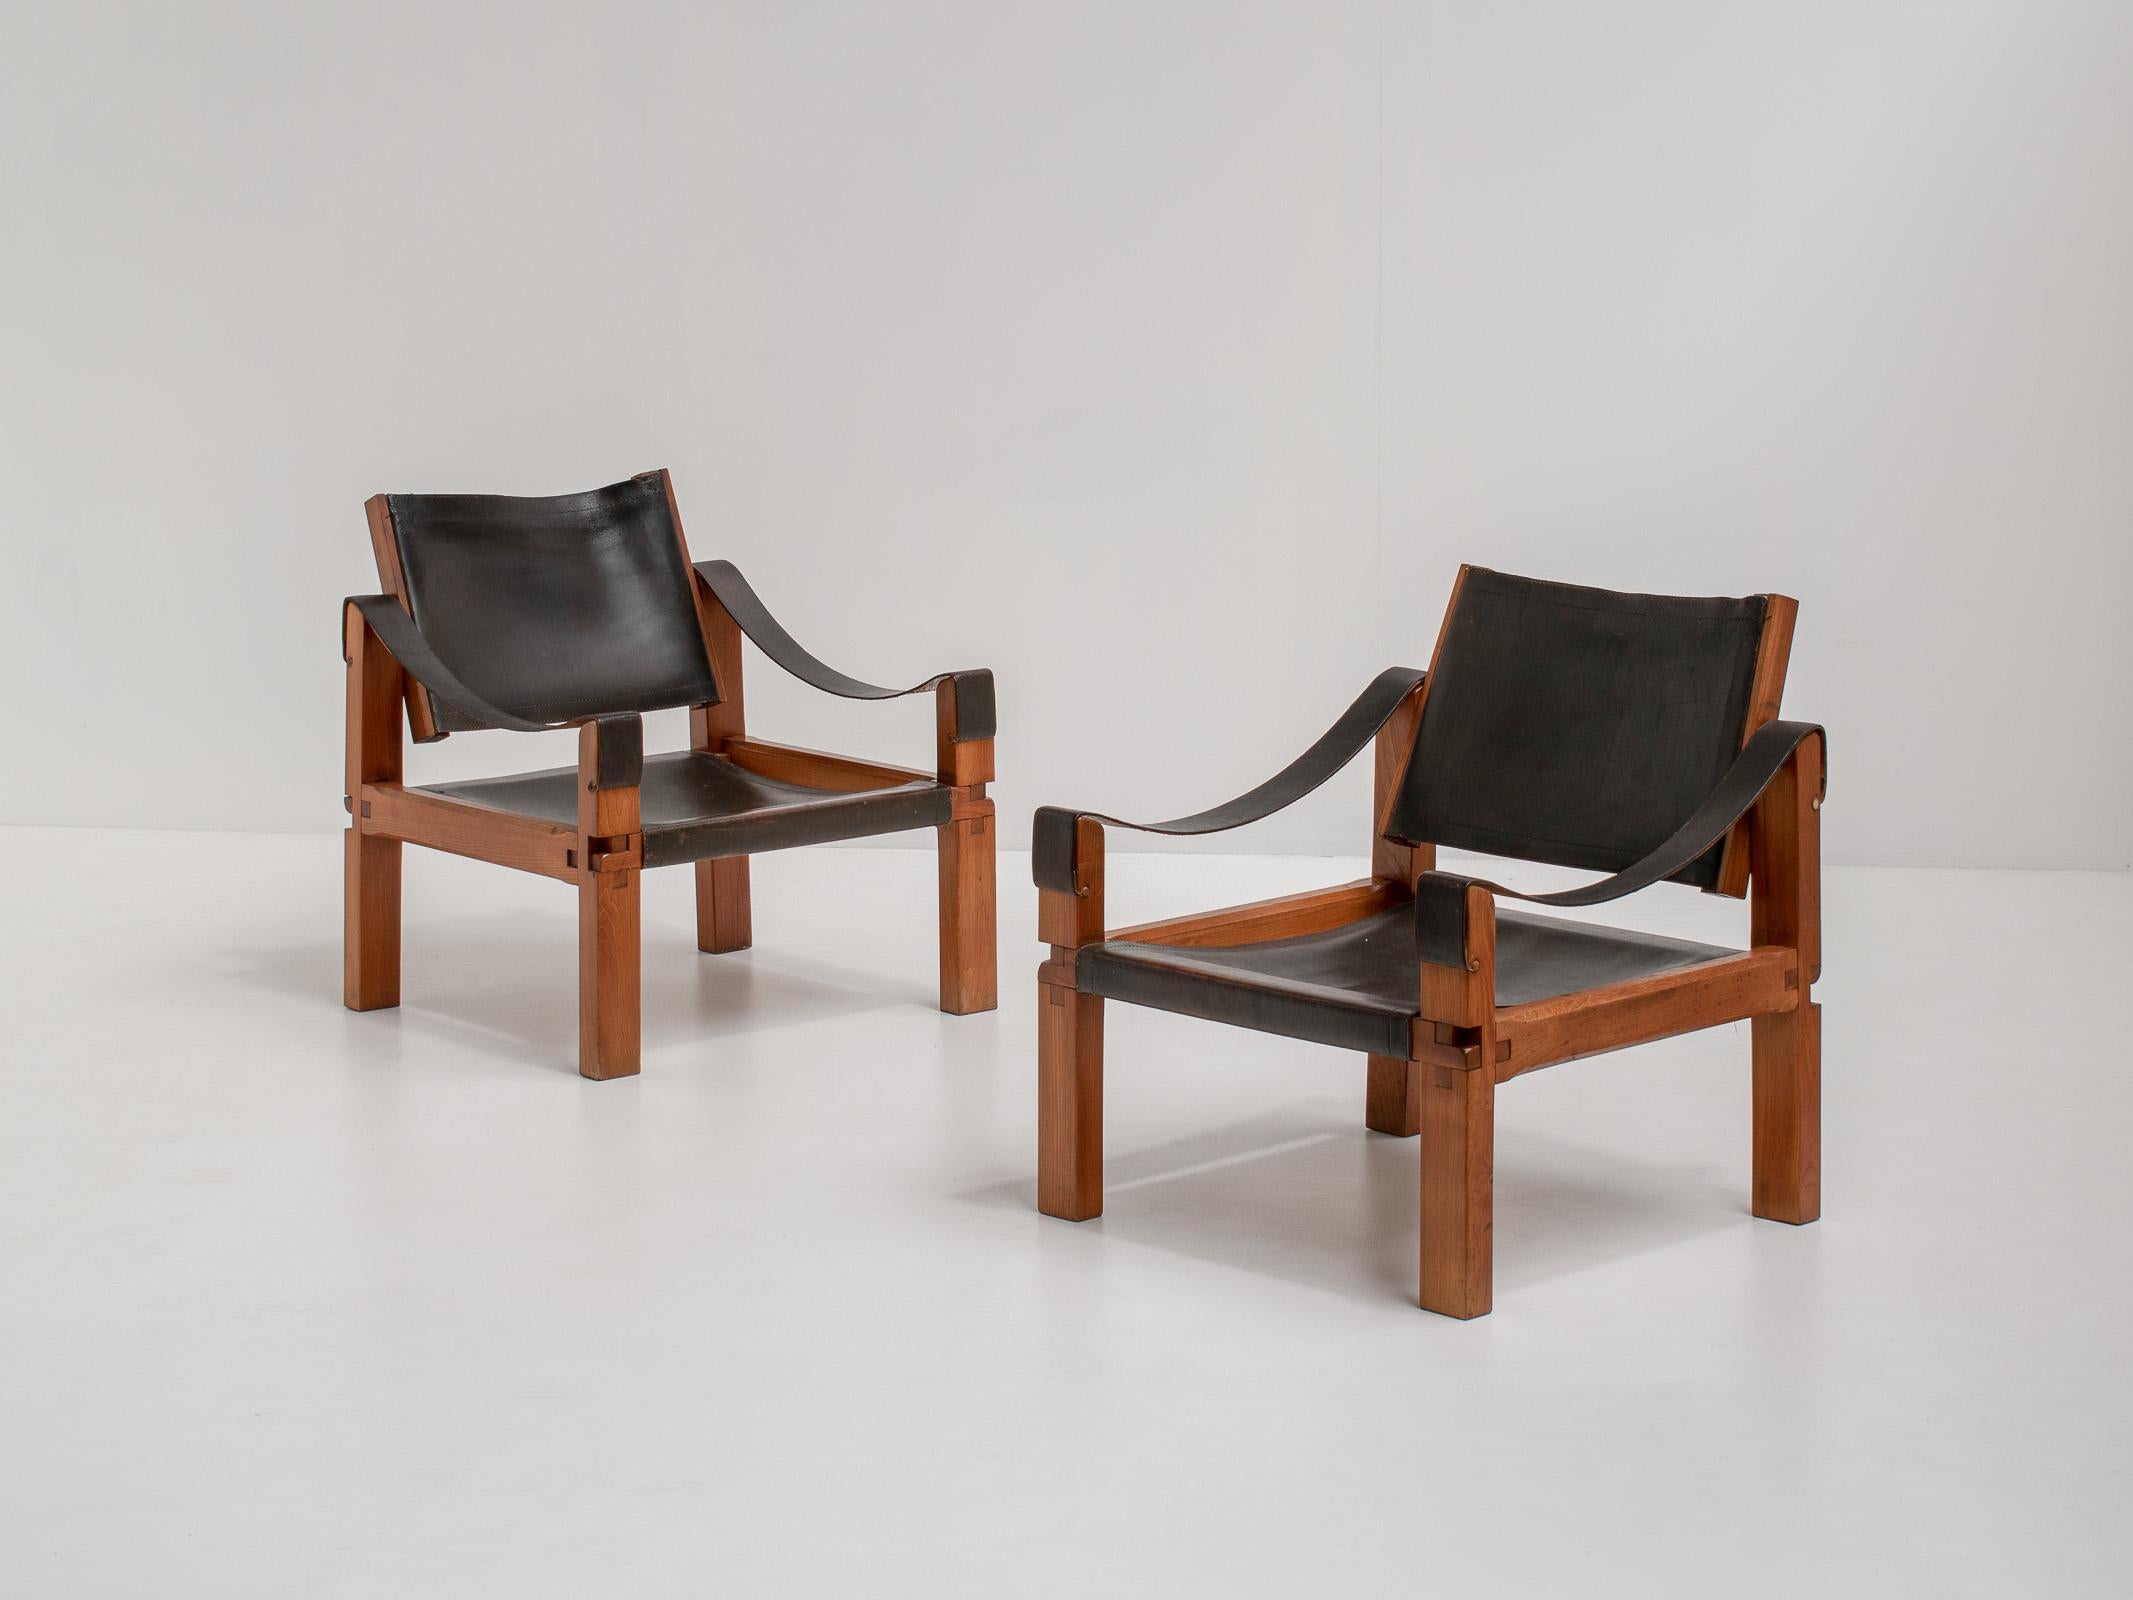 Stunning set of two S10 ‘Sahara’ armchairs by renowned French designer Pierre Chapo, France 1960s

Two pieces of saddle leather are stretched between the beautifully crafted solid elm frame. The armrests are made of leather strips suspended on the